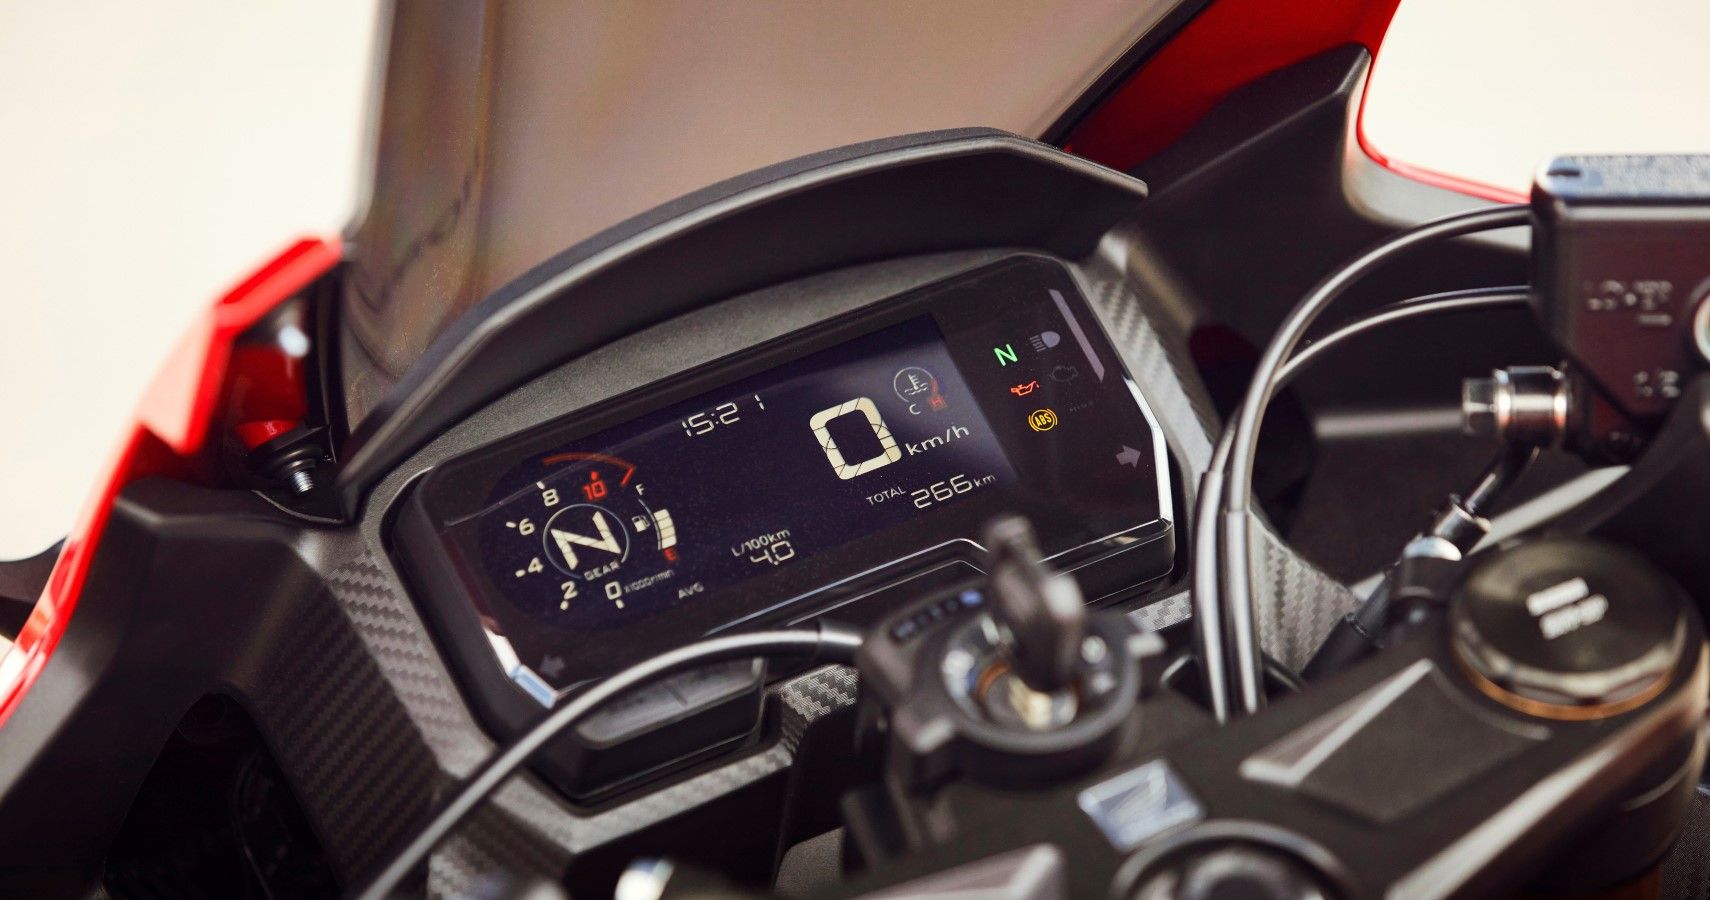 2022 Honda CBR500R gets new functions on the LCD